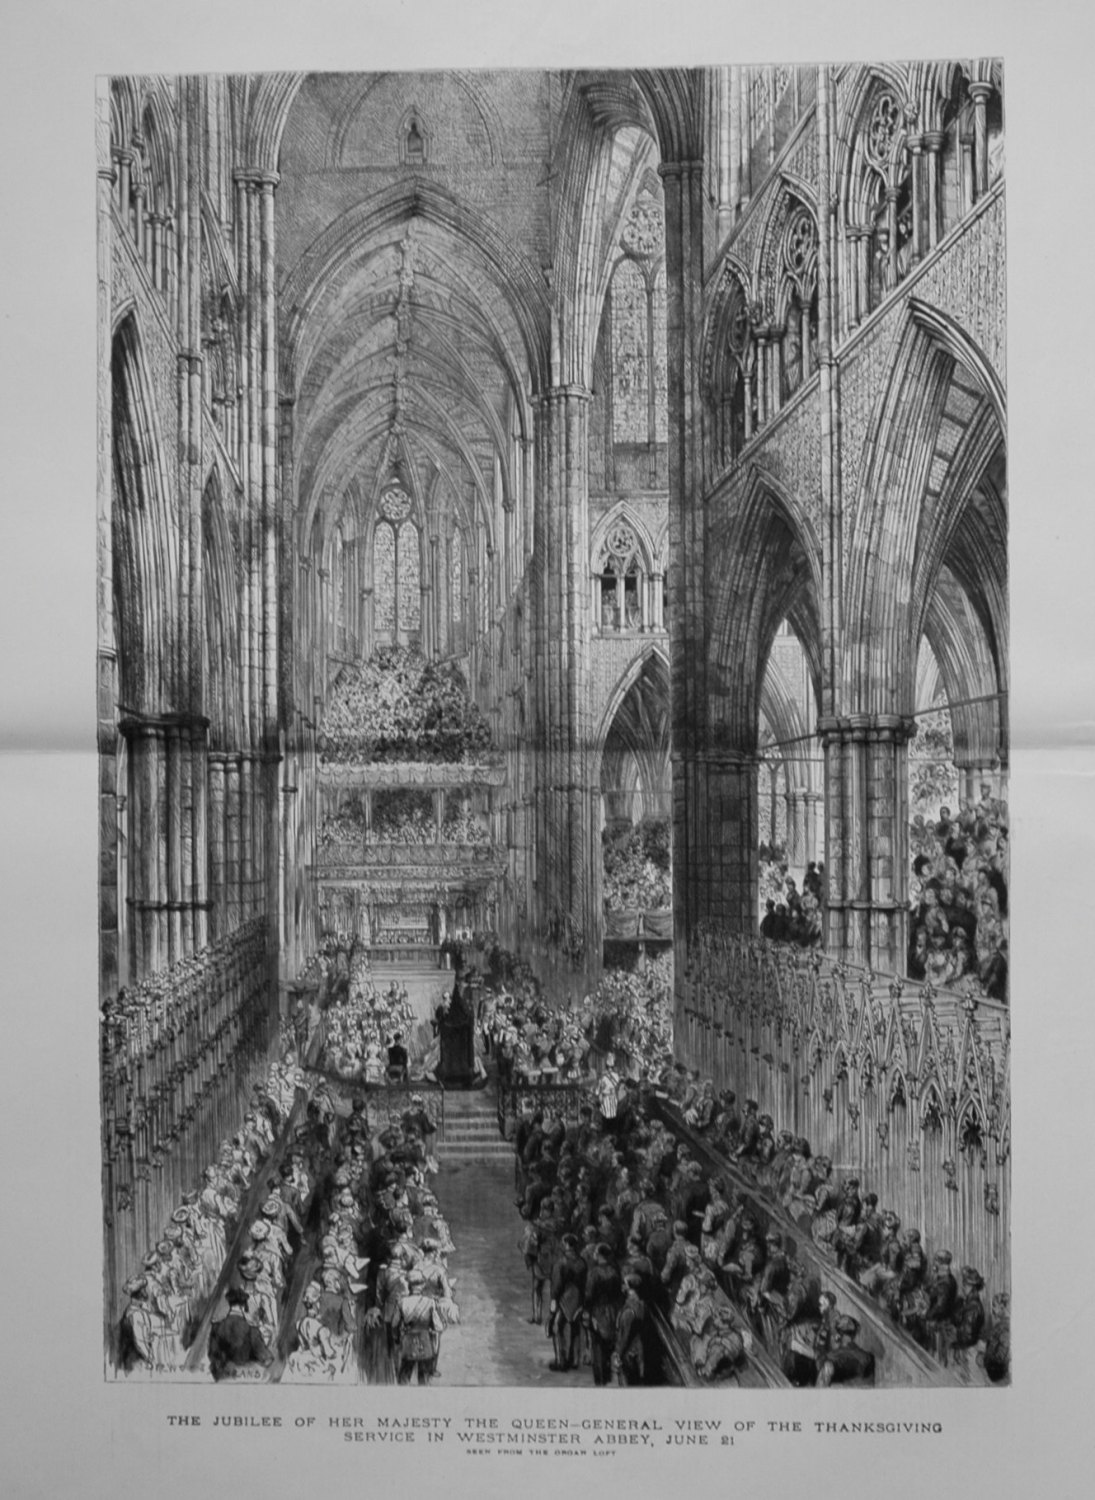 The Jubilee of Her Majesty the Queen - General View of the Thanksgiving Ser